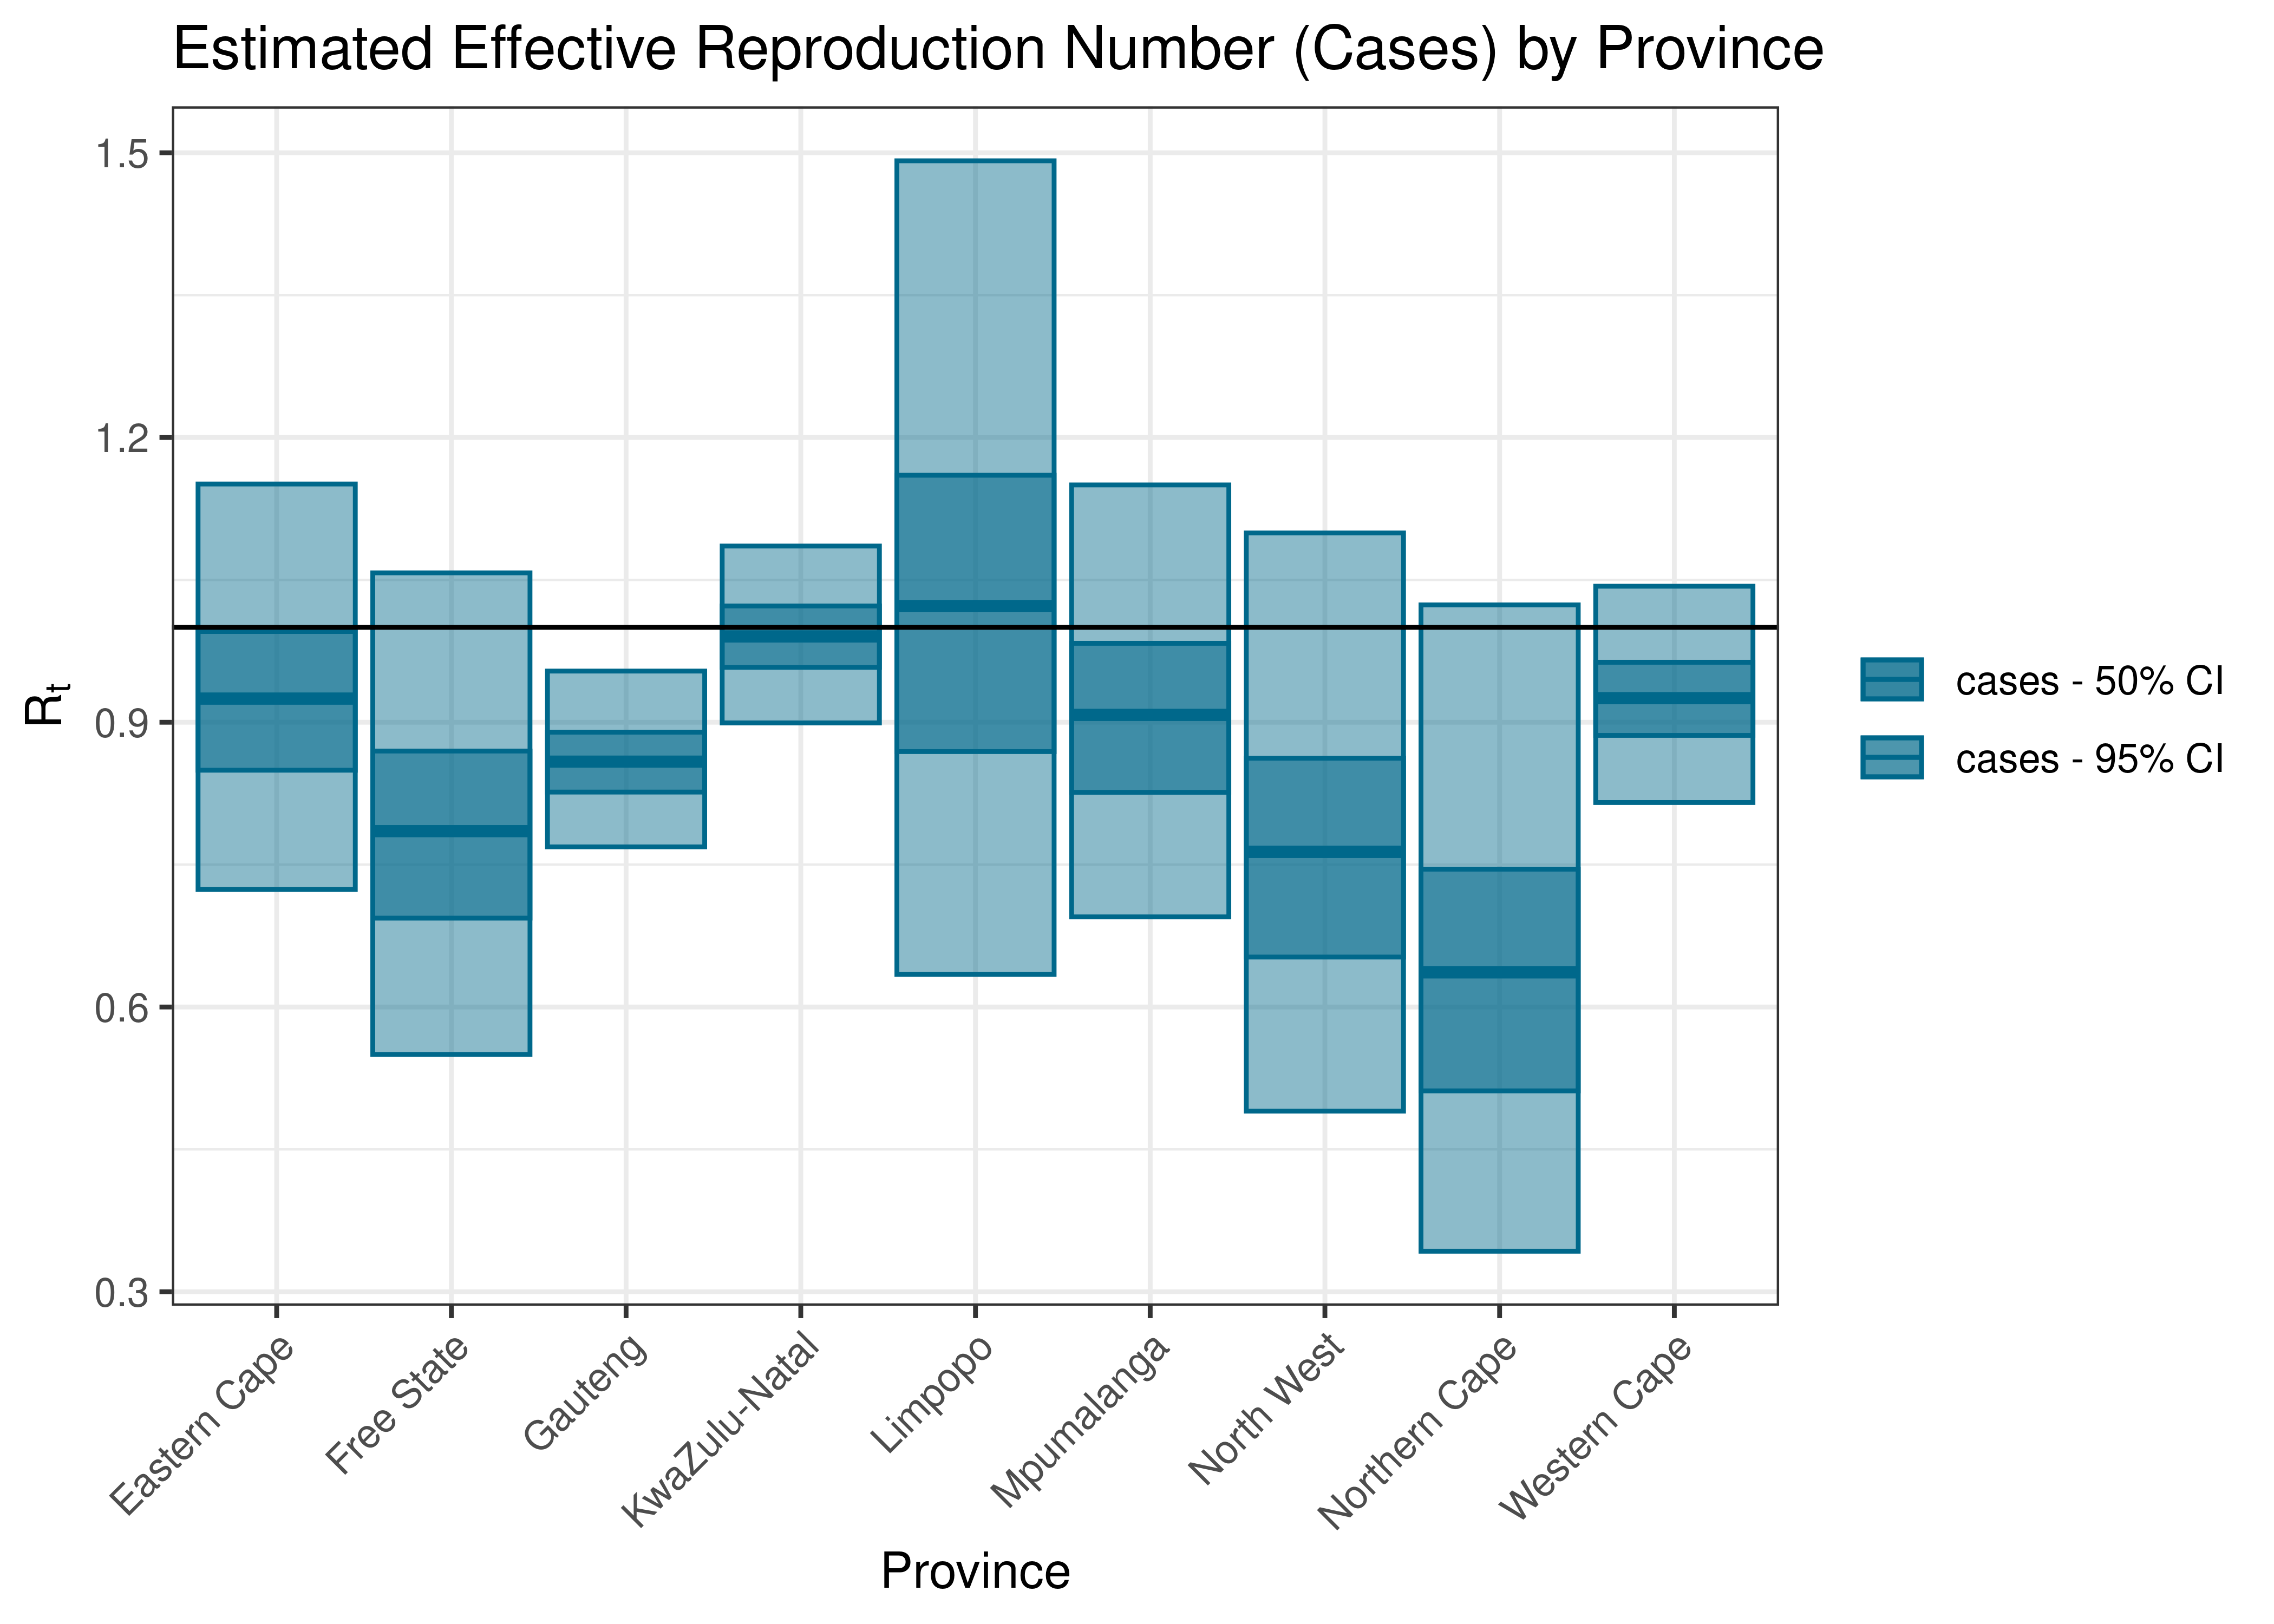 Estimated Effective Reproduction Number based on Cases by Province